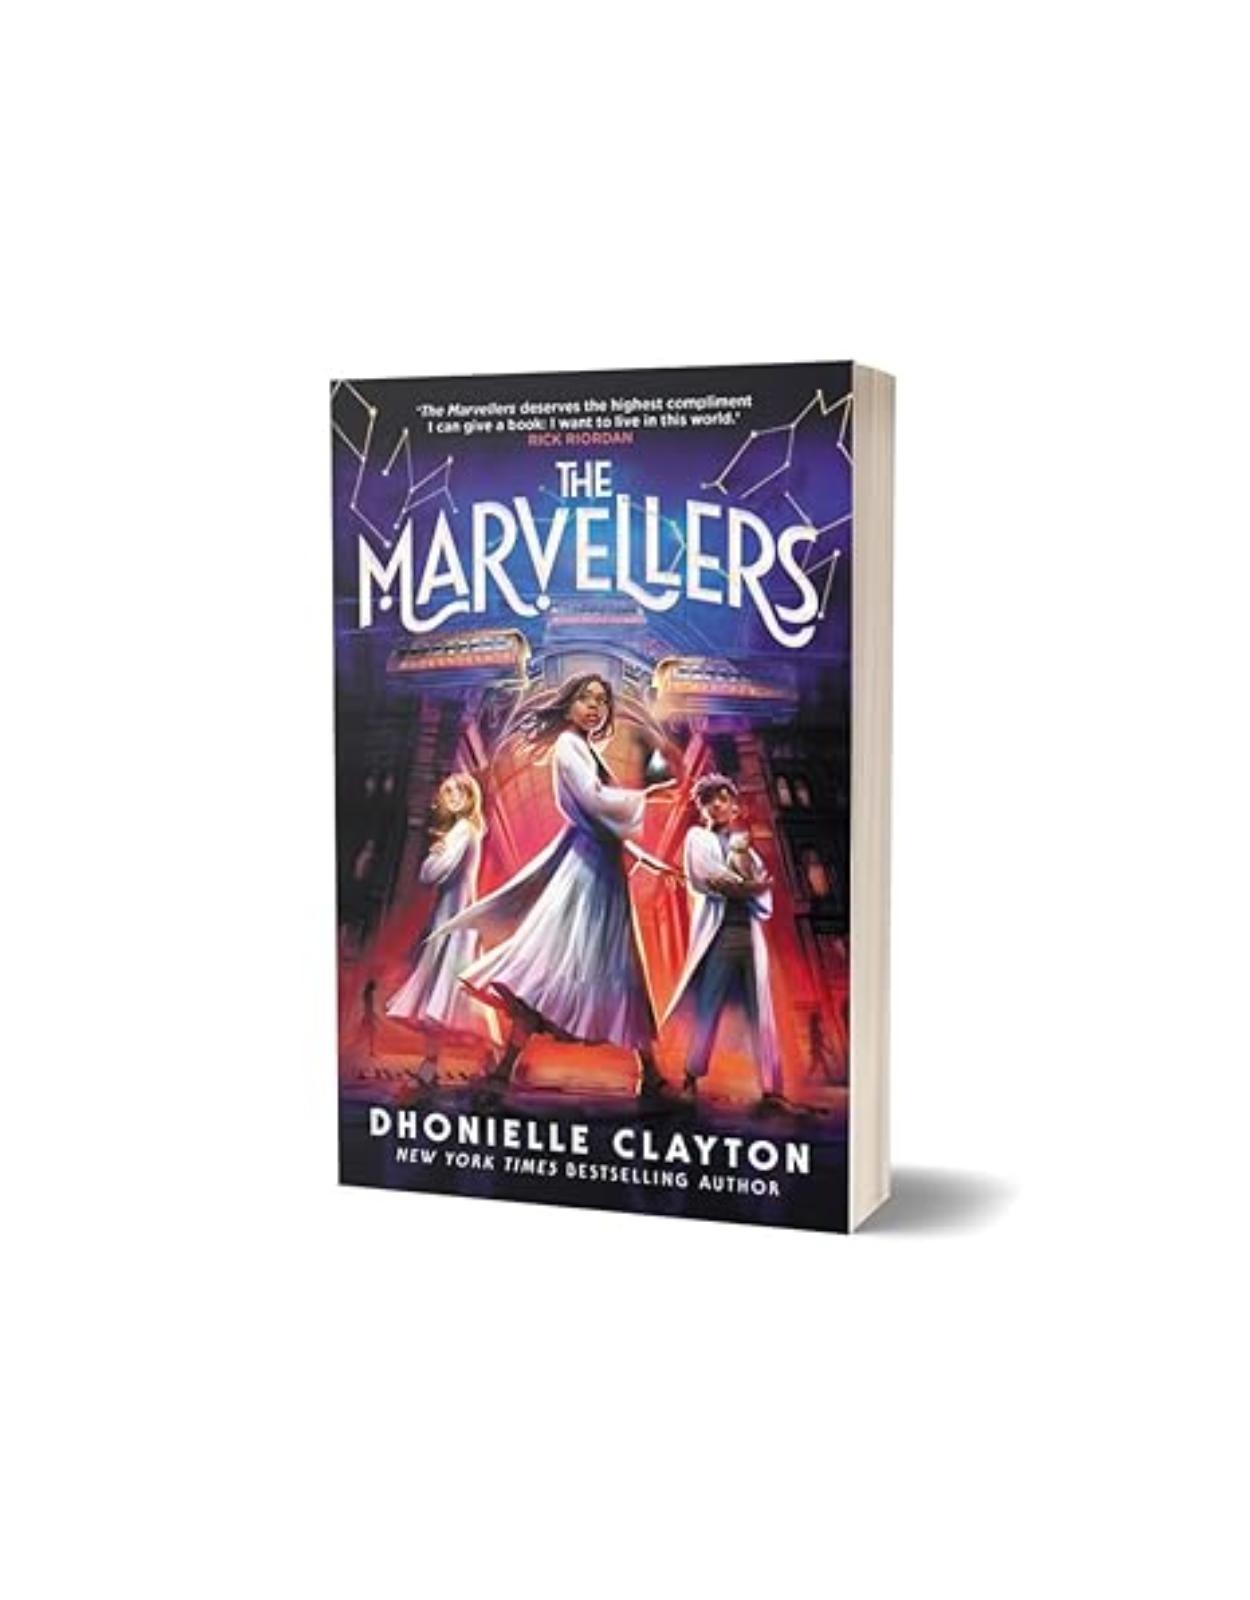 The Marvellers: the spellbinding magical fantasy adventure